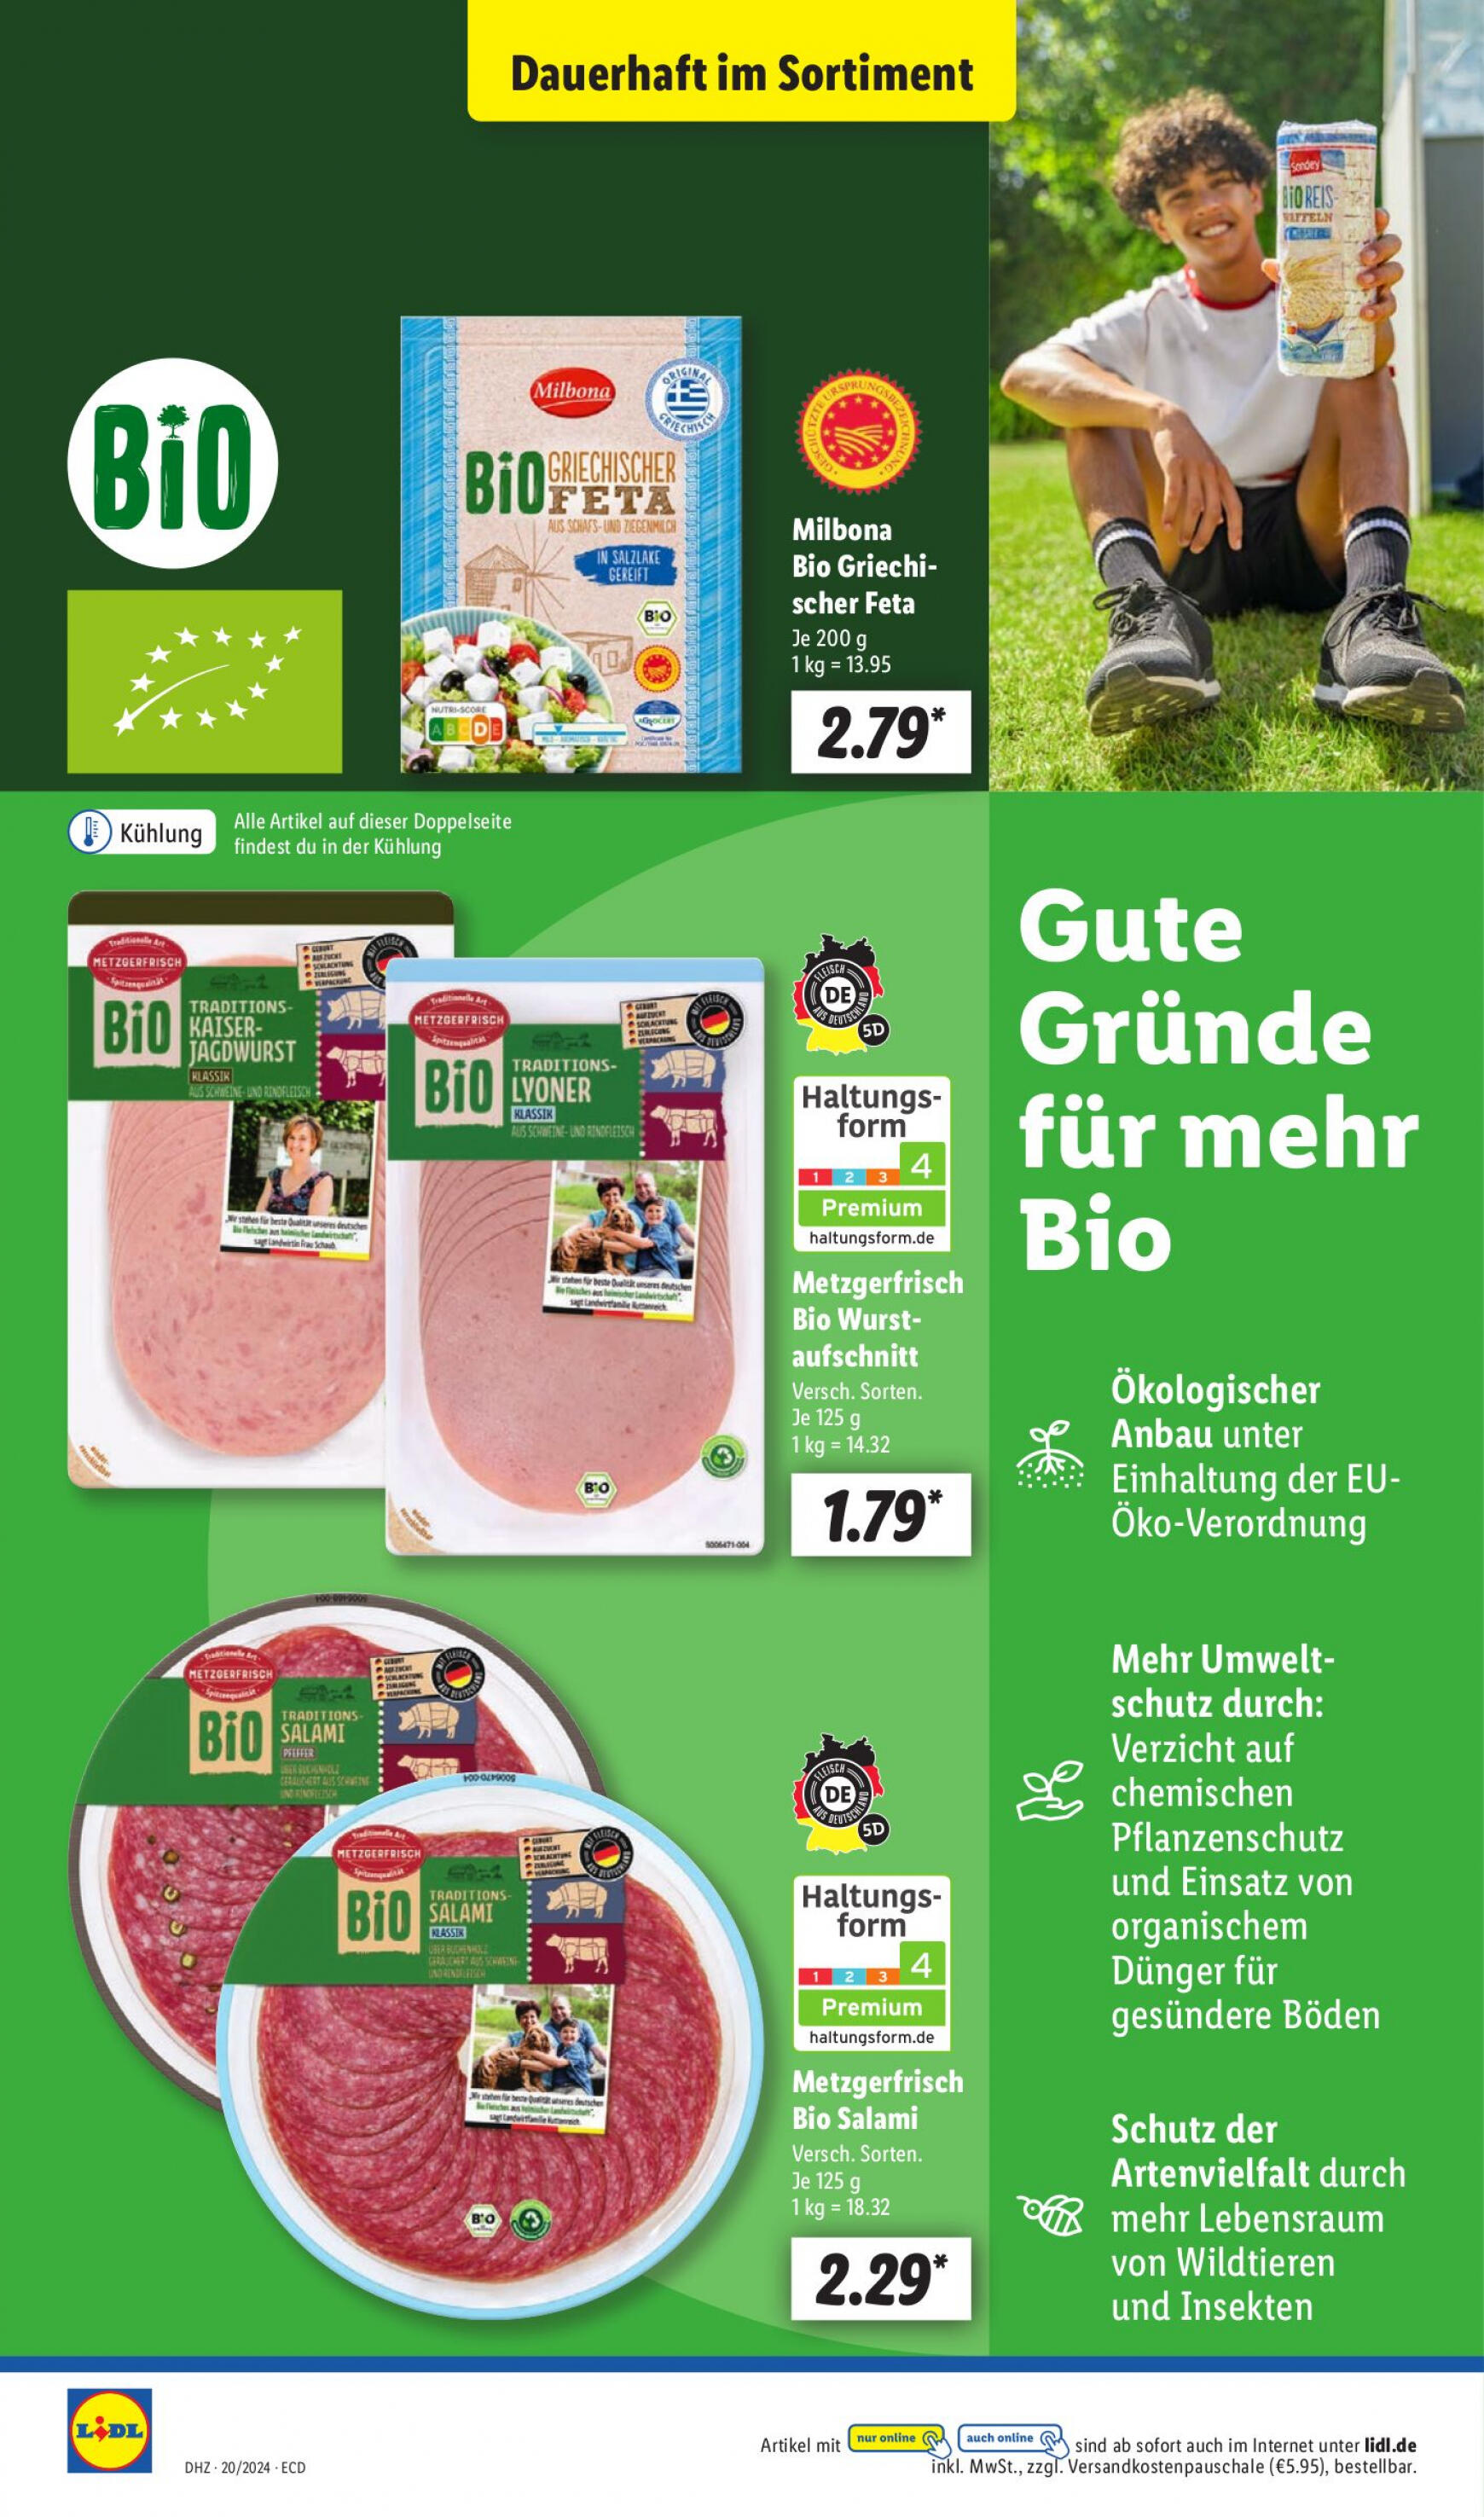 lidl - Flyer Lidl aktuell 13.05. - 18.05. - page: 48